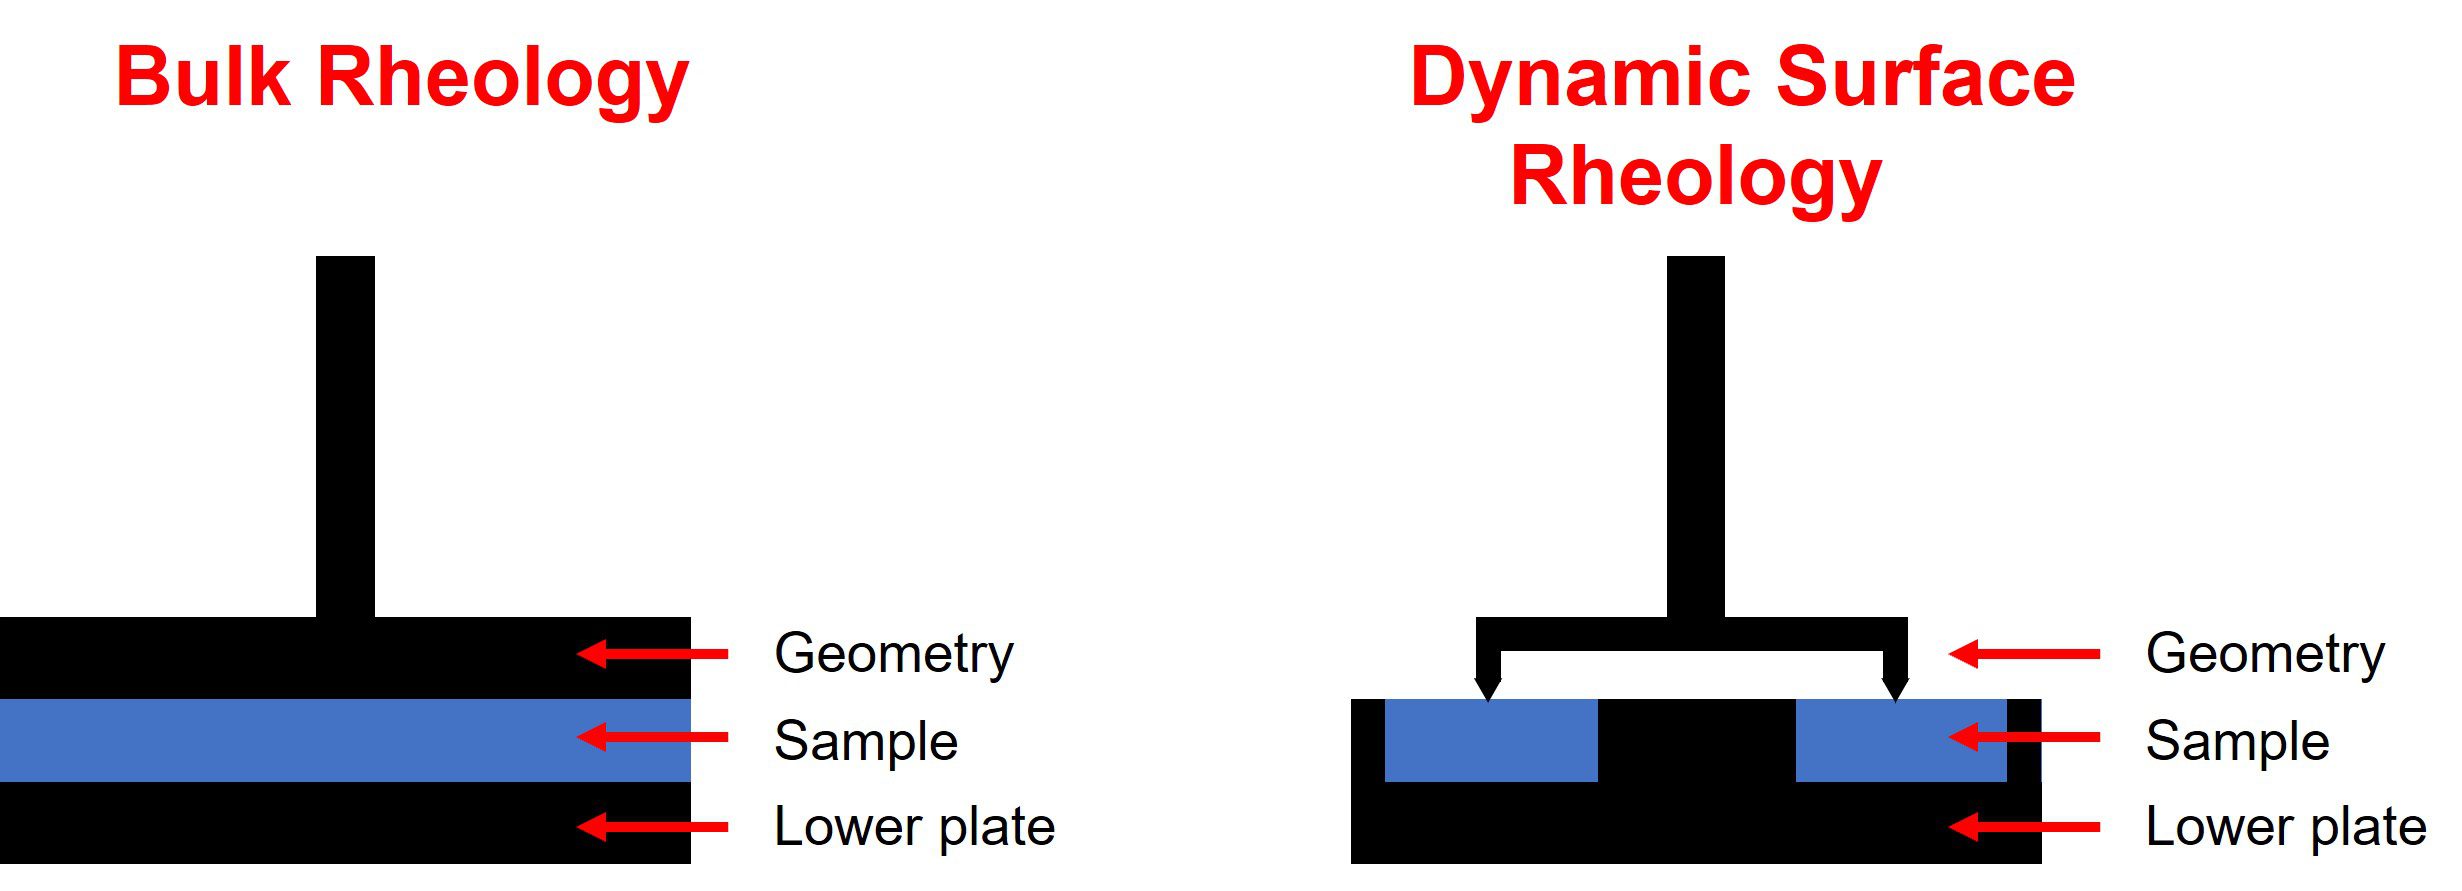 A schematic to show the difference between the reaction set-up of a bulk rheology and dynamic surface rheology